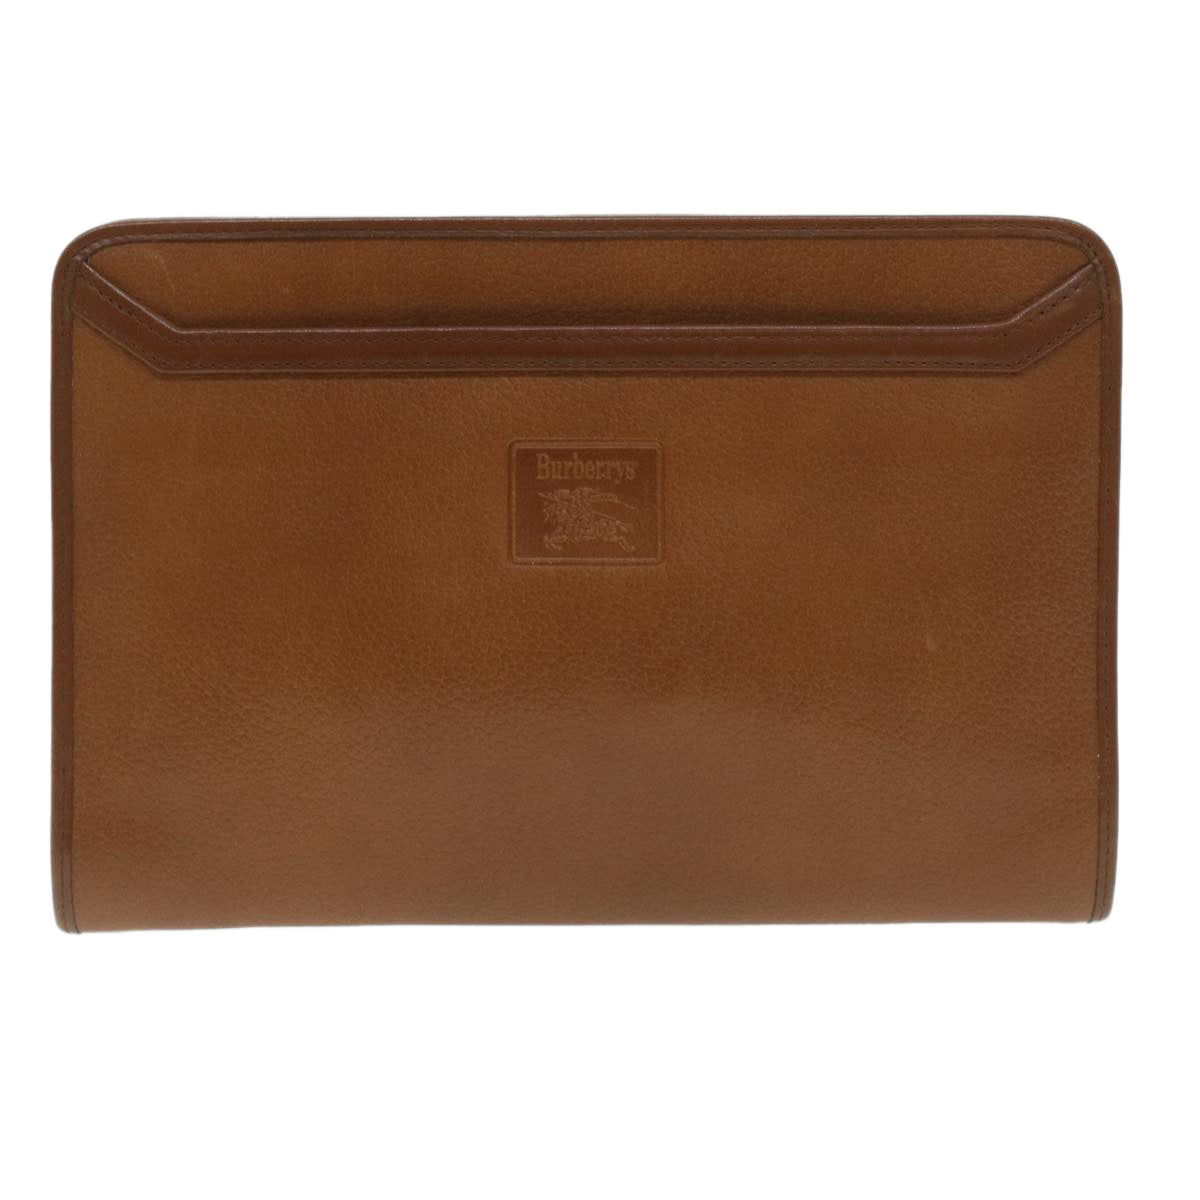 Burberrys Clutch Bag Leather Brown Auth bs4313